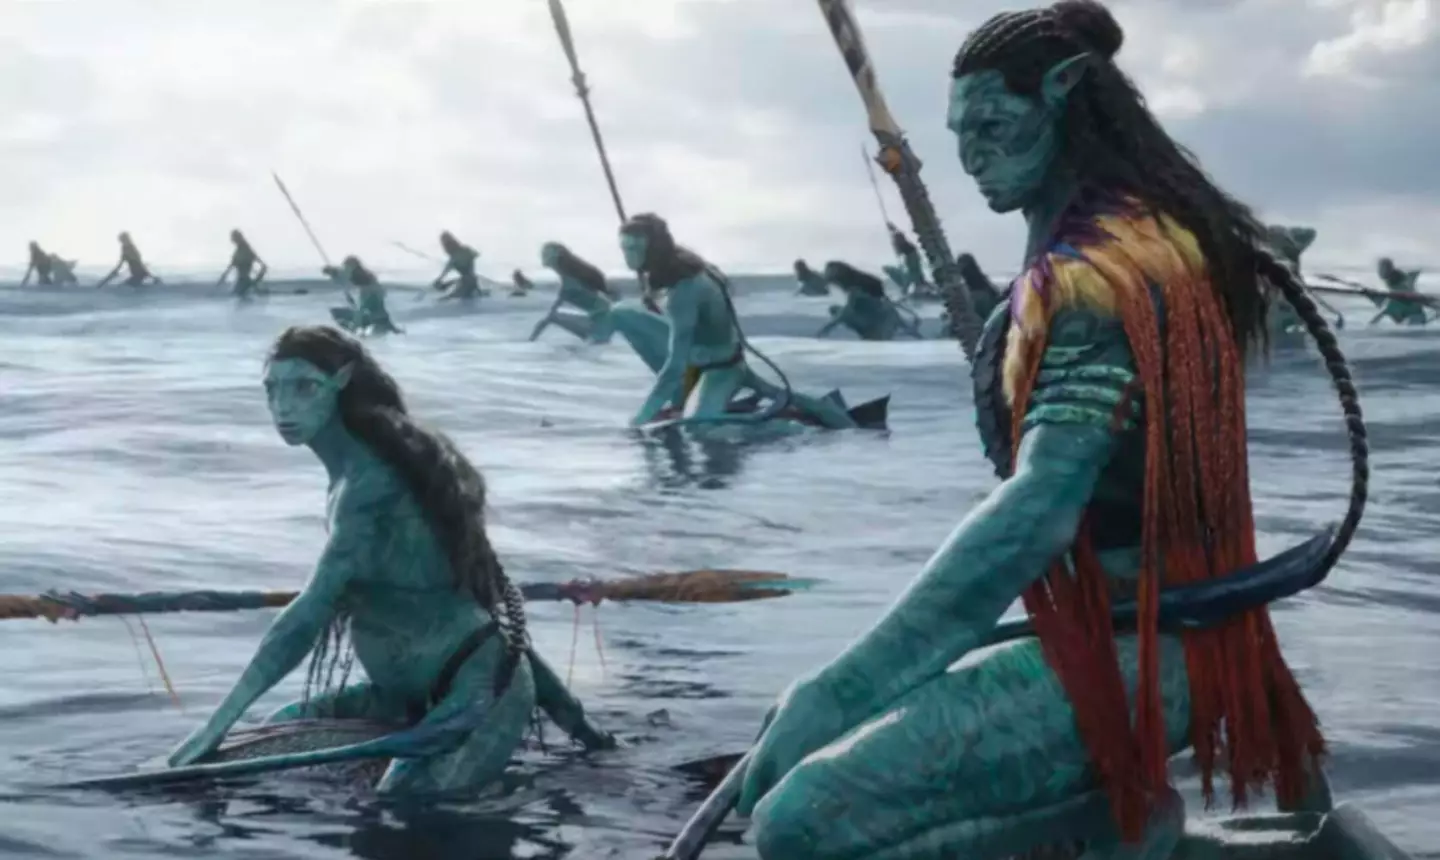 Neytiri hunting while pregnant in Avatar: The Way of Water.